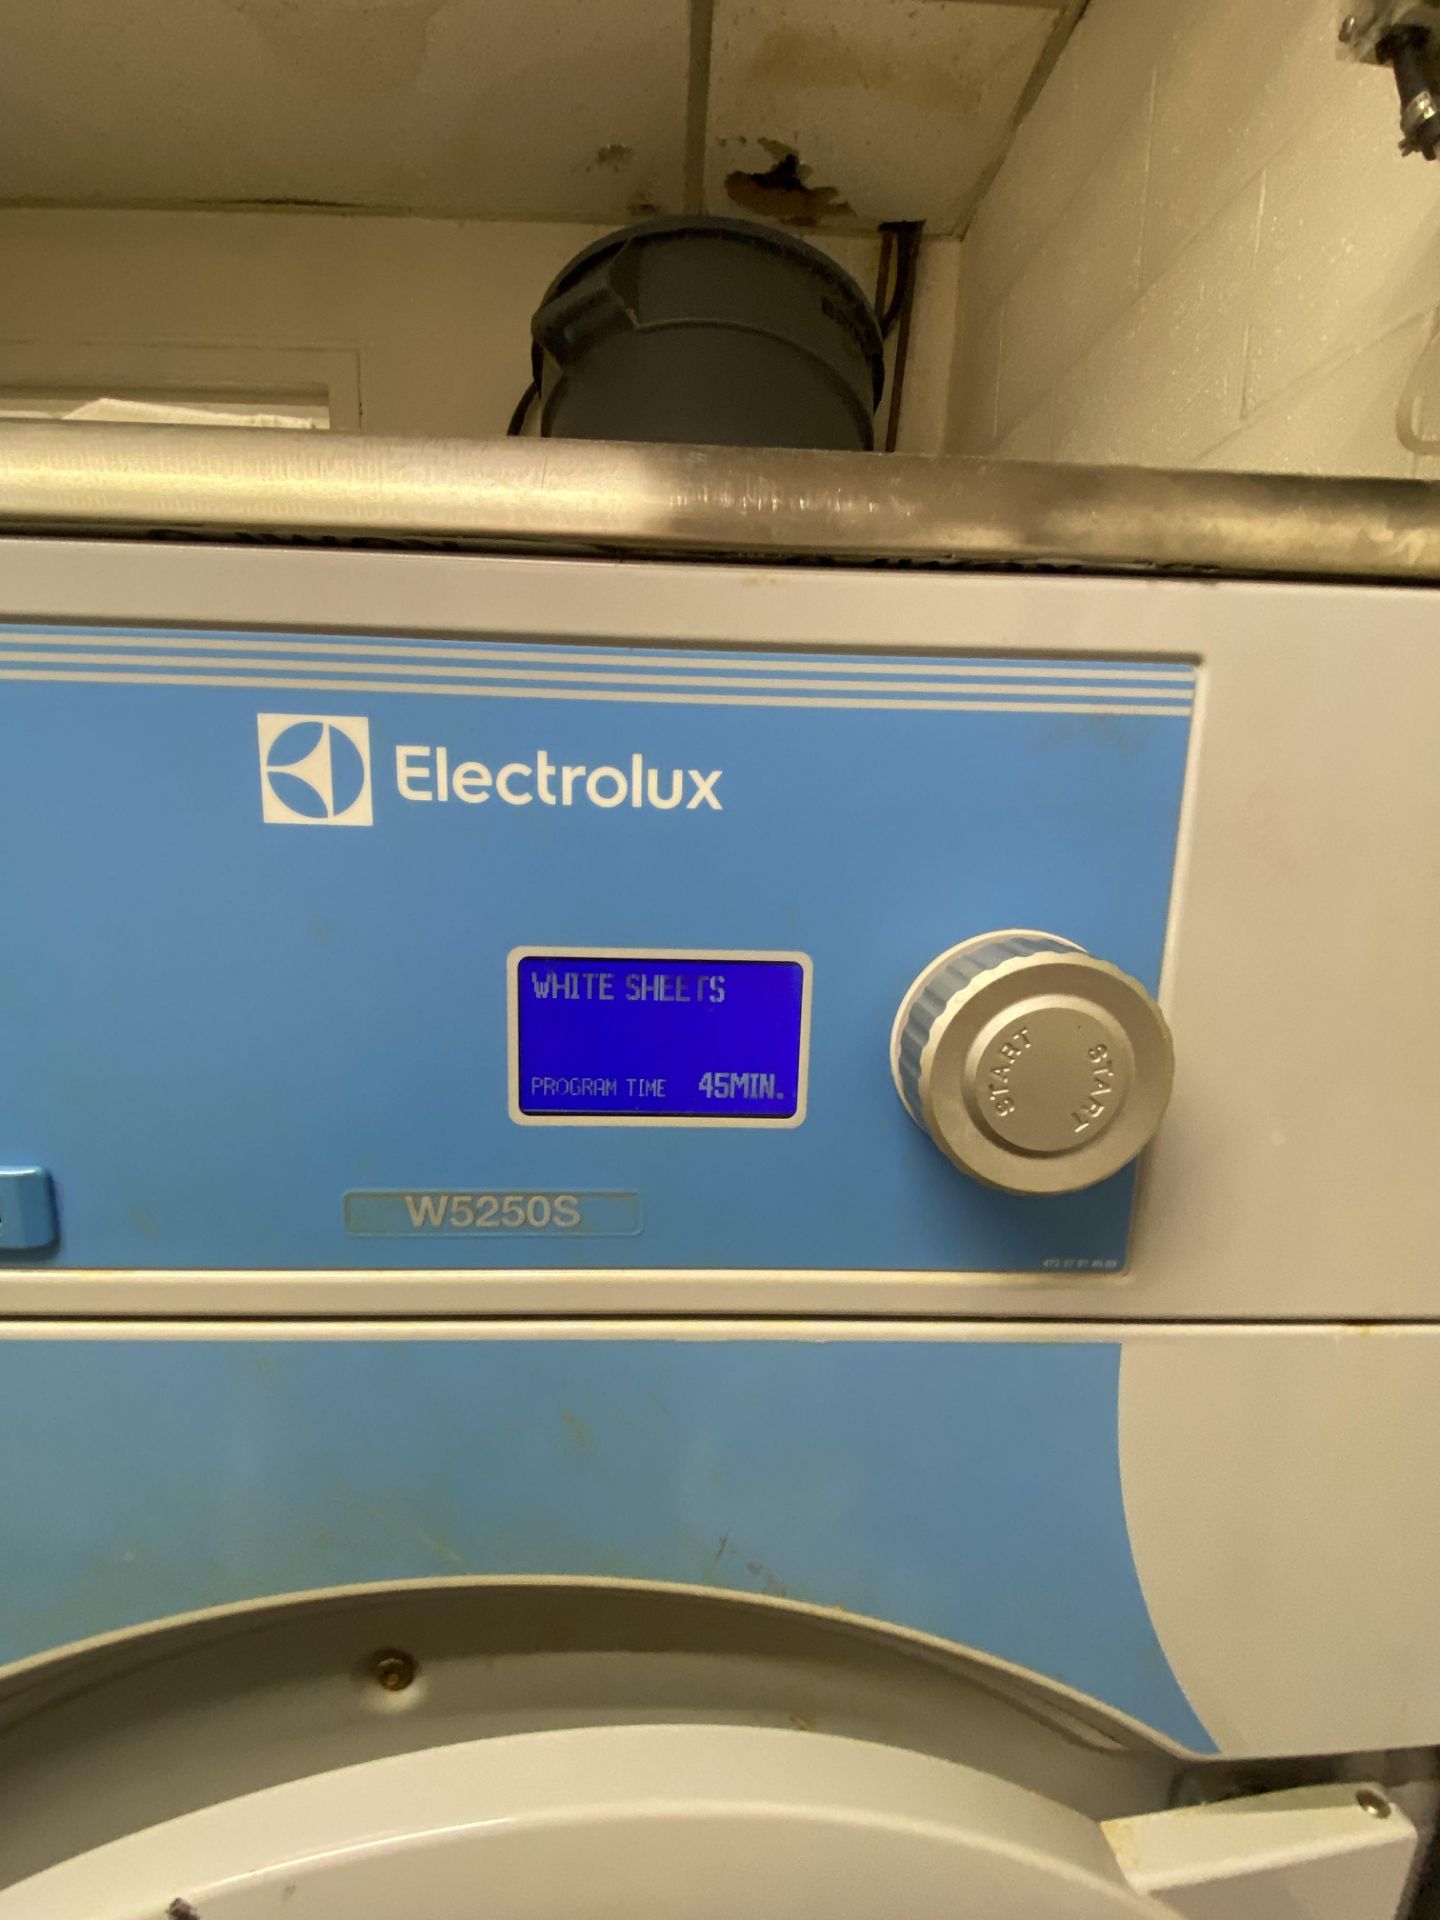 UNIMAC DIGITAL WASHER AND ELECTROLUX WS2505 INDUSTRIAL DRYER - Image 9 of 10